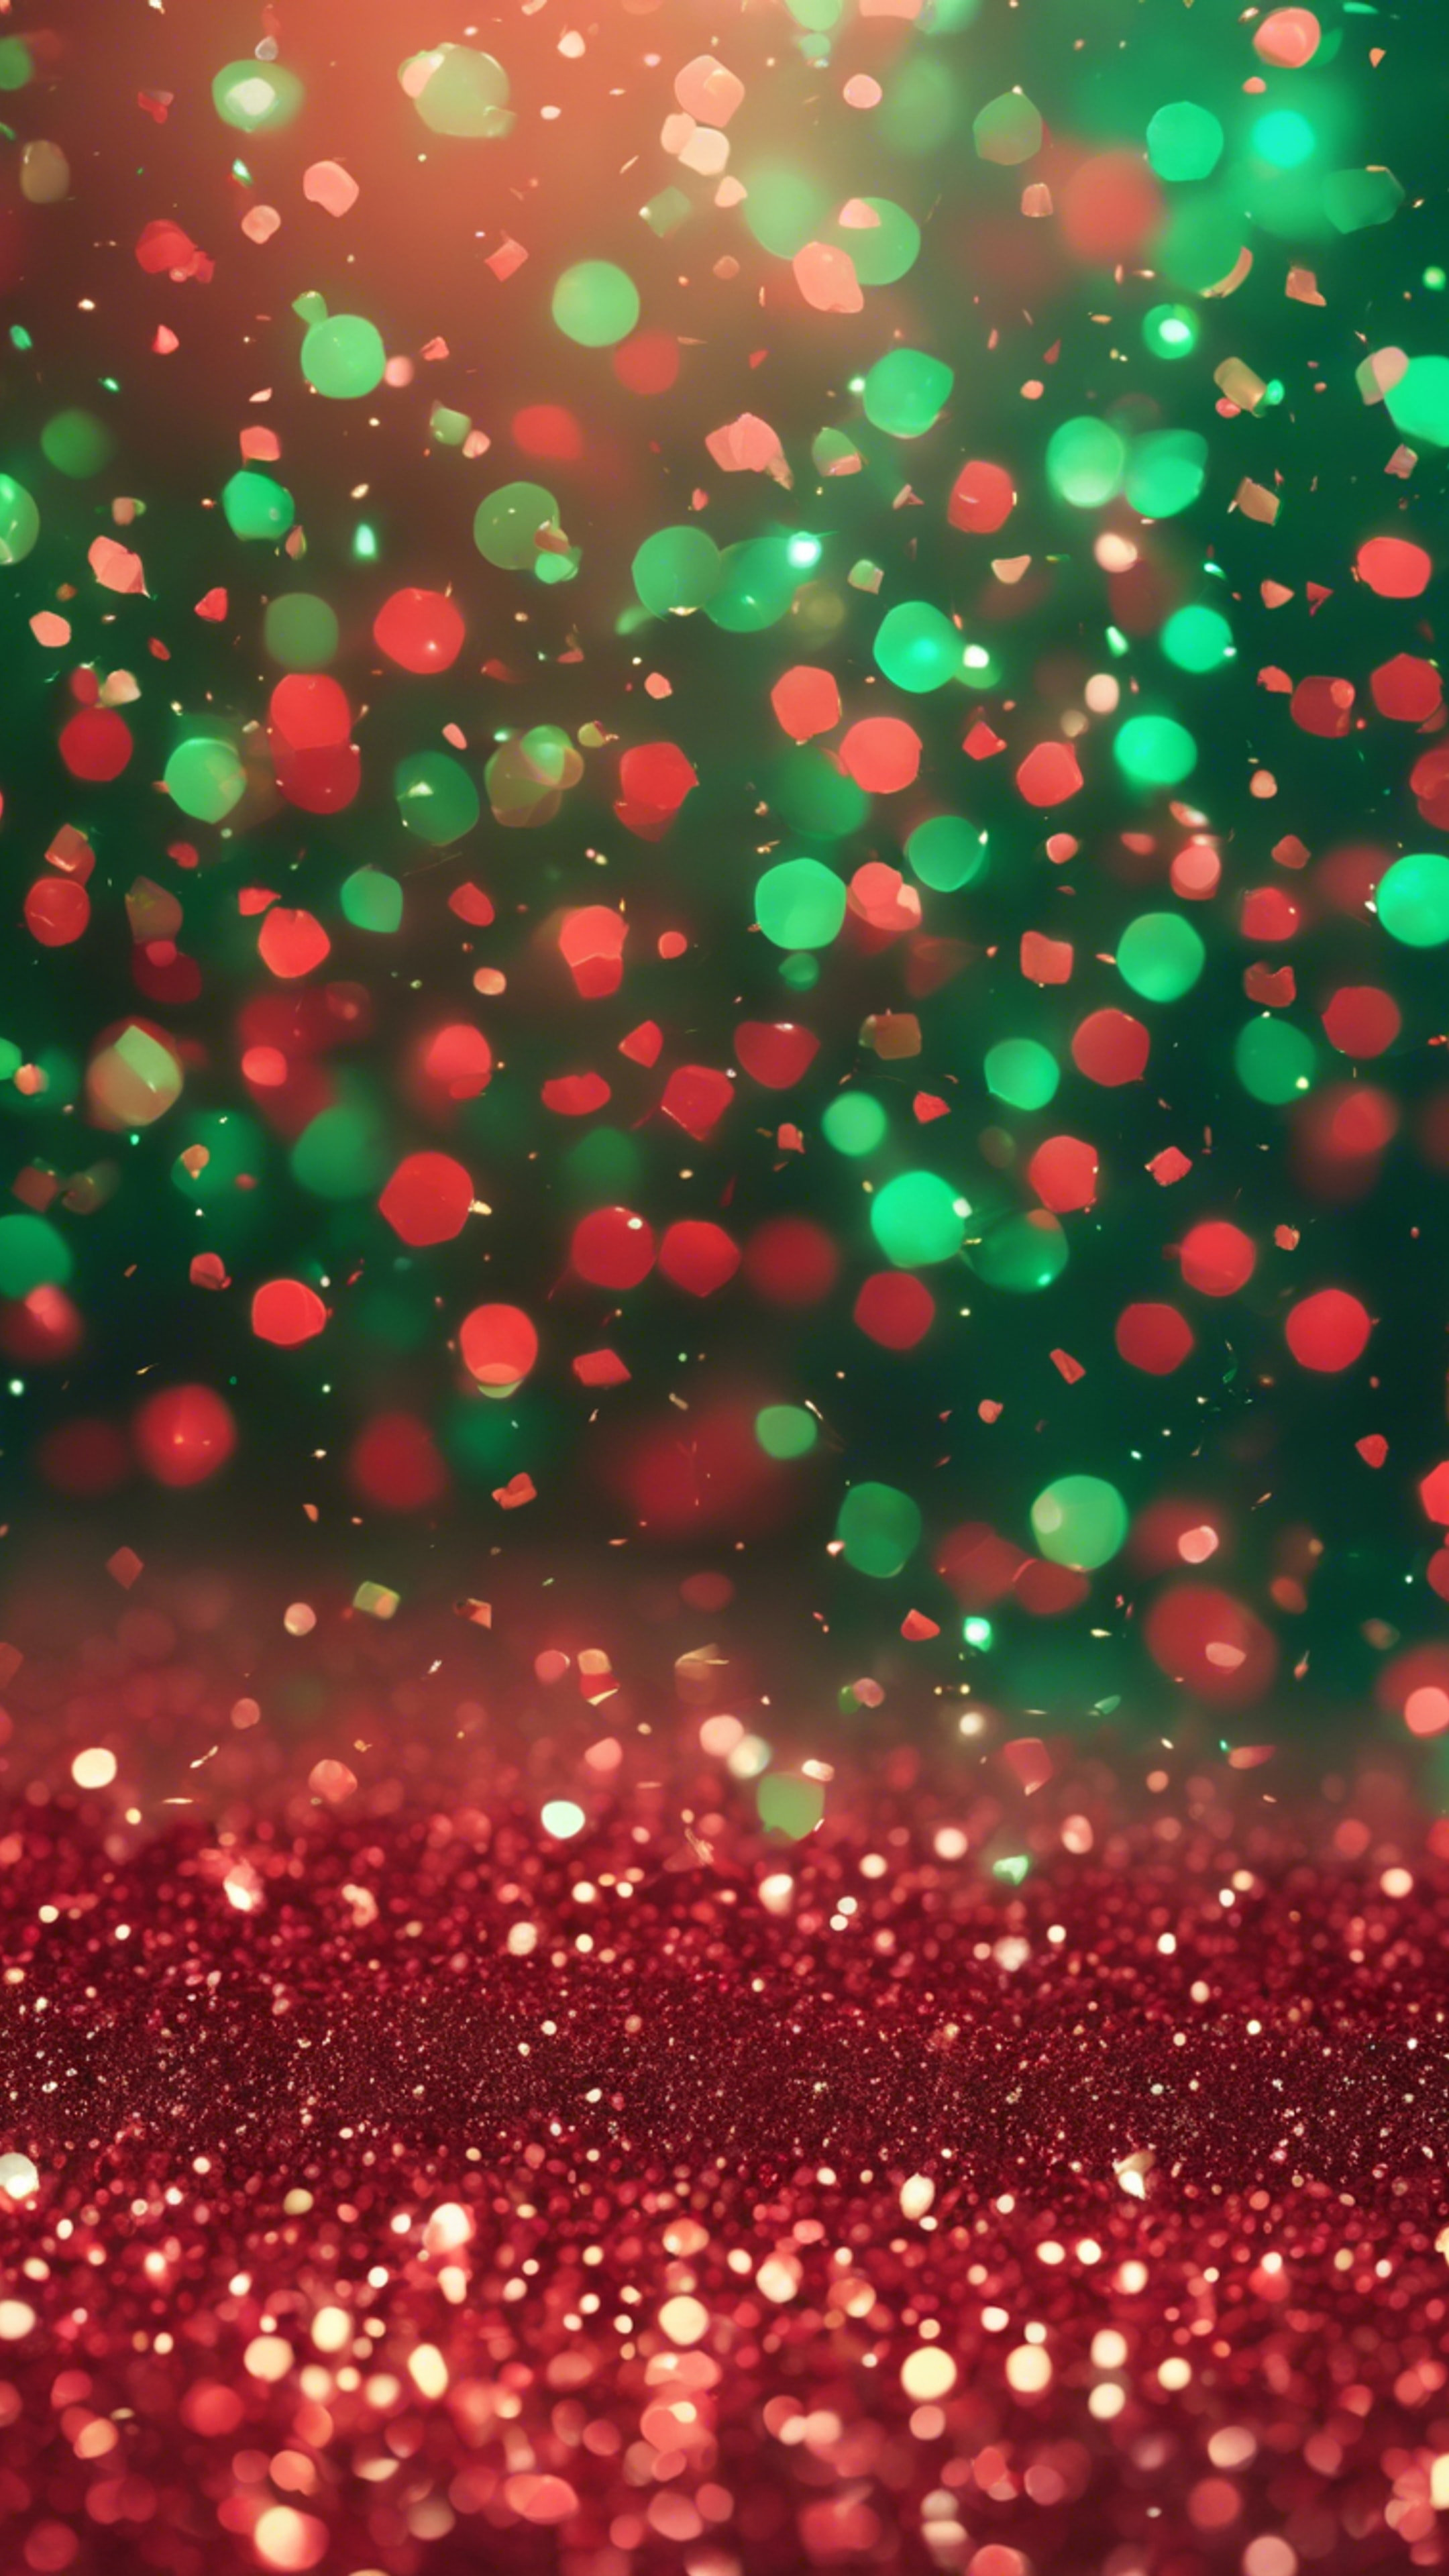 A seamless pattern of red and green glitter sparkles Валлпапер[5d1121e27deb4297acdf]